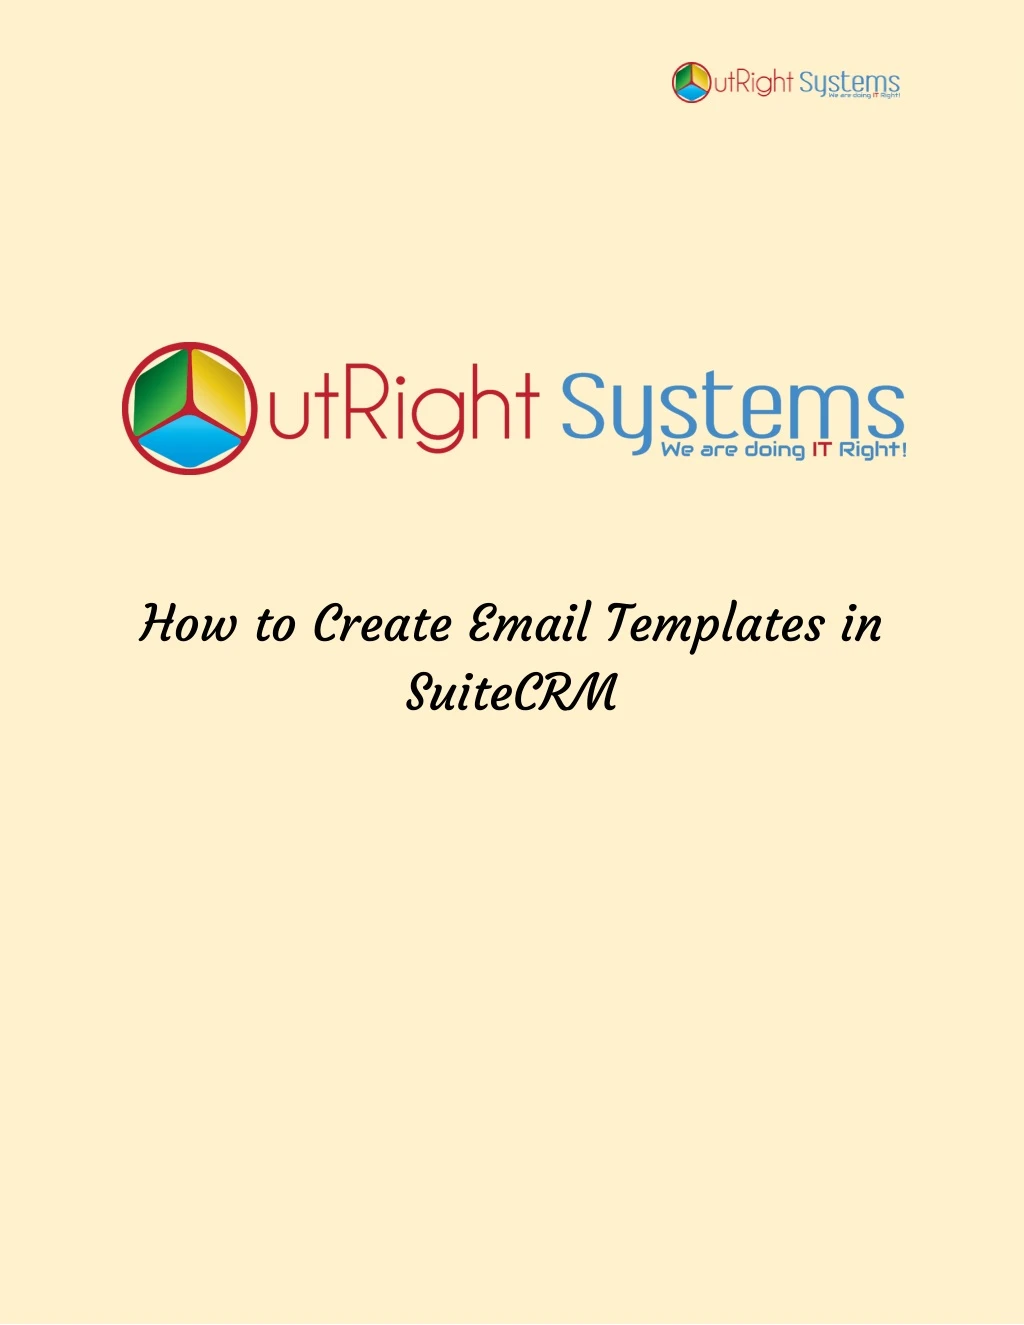 how to create email templates in suitecrm